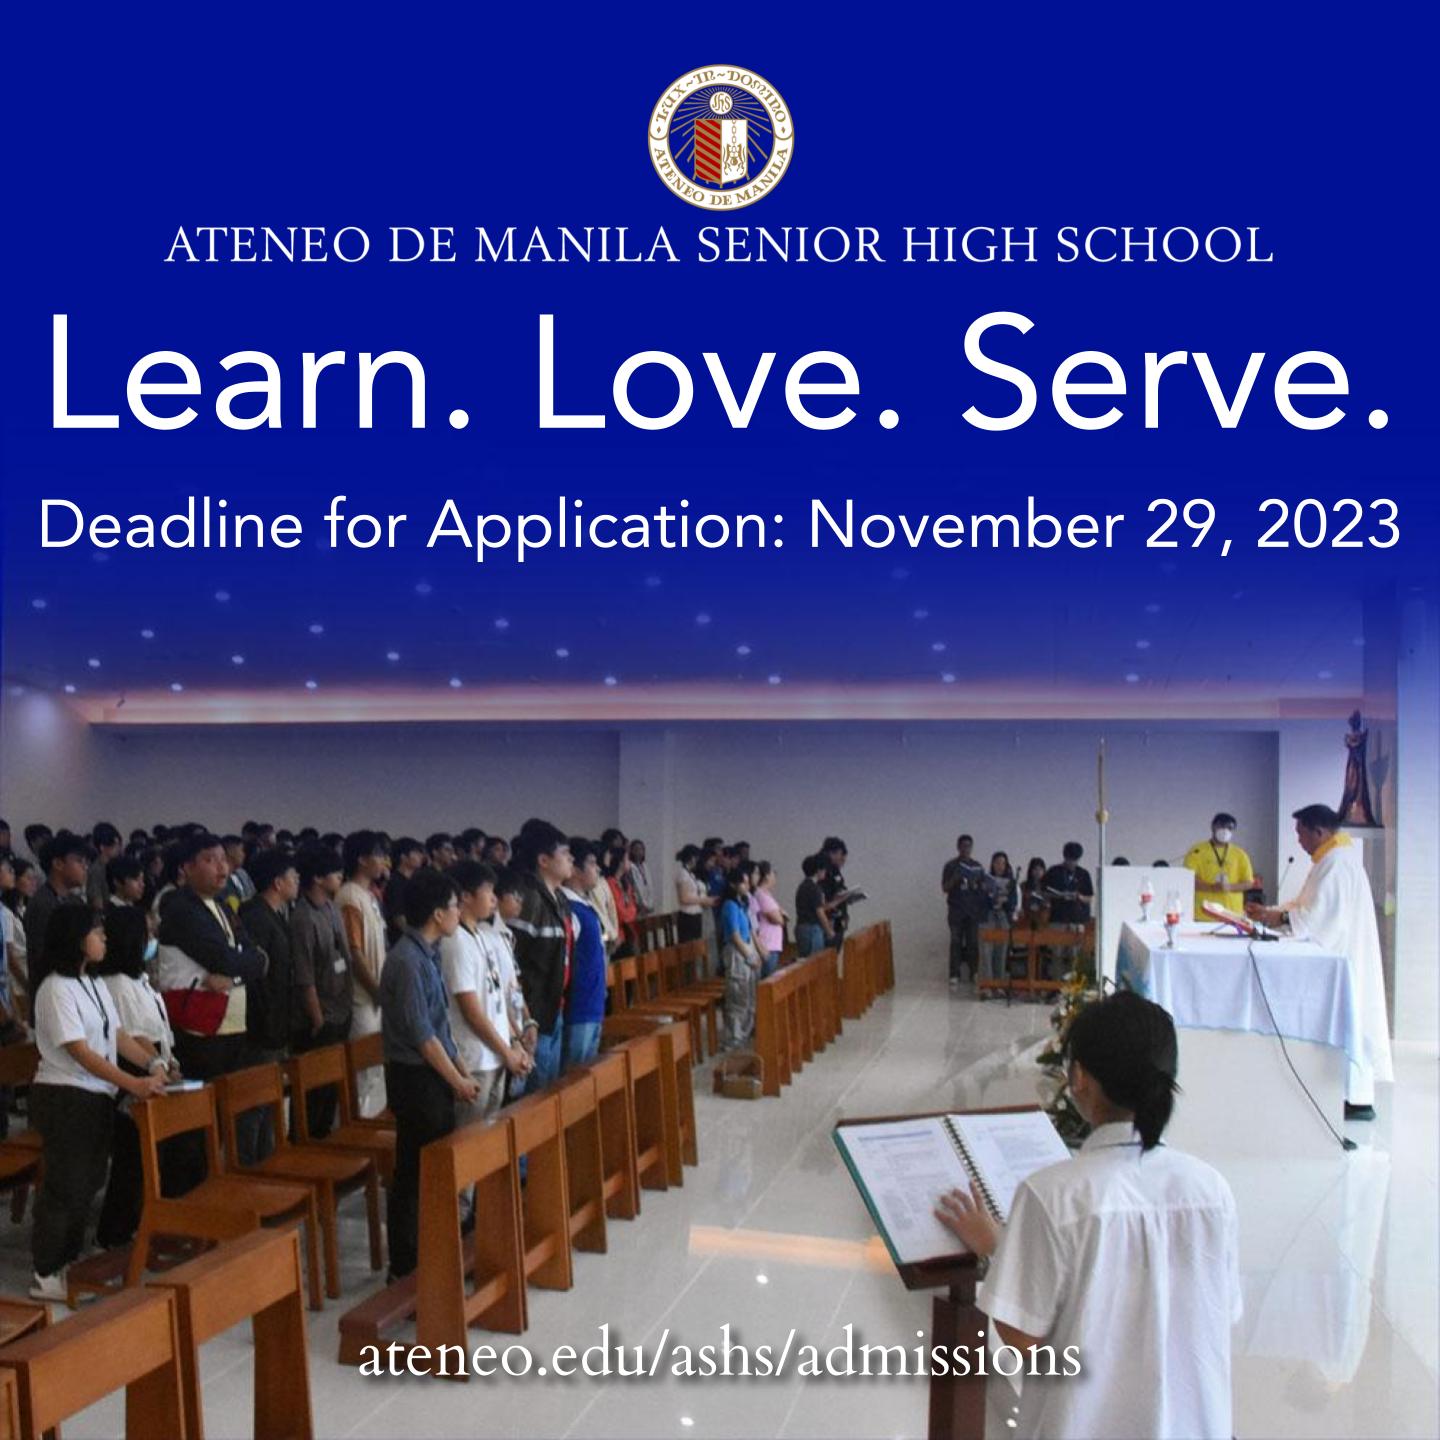 The deadline for creating your admission application account is November 29, 2023.